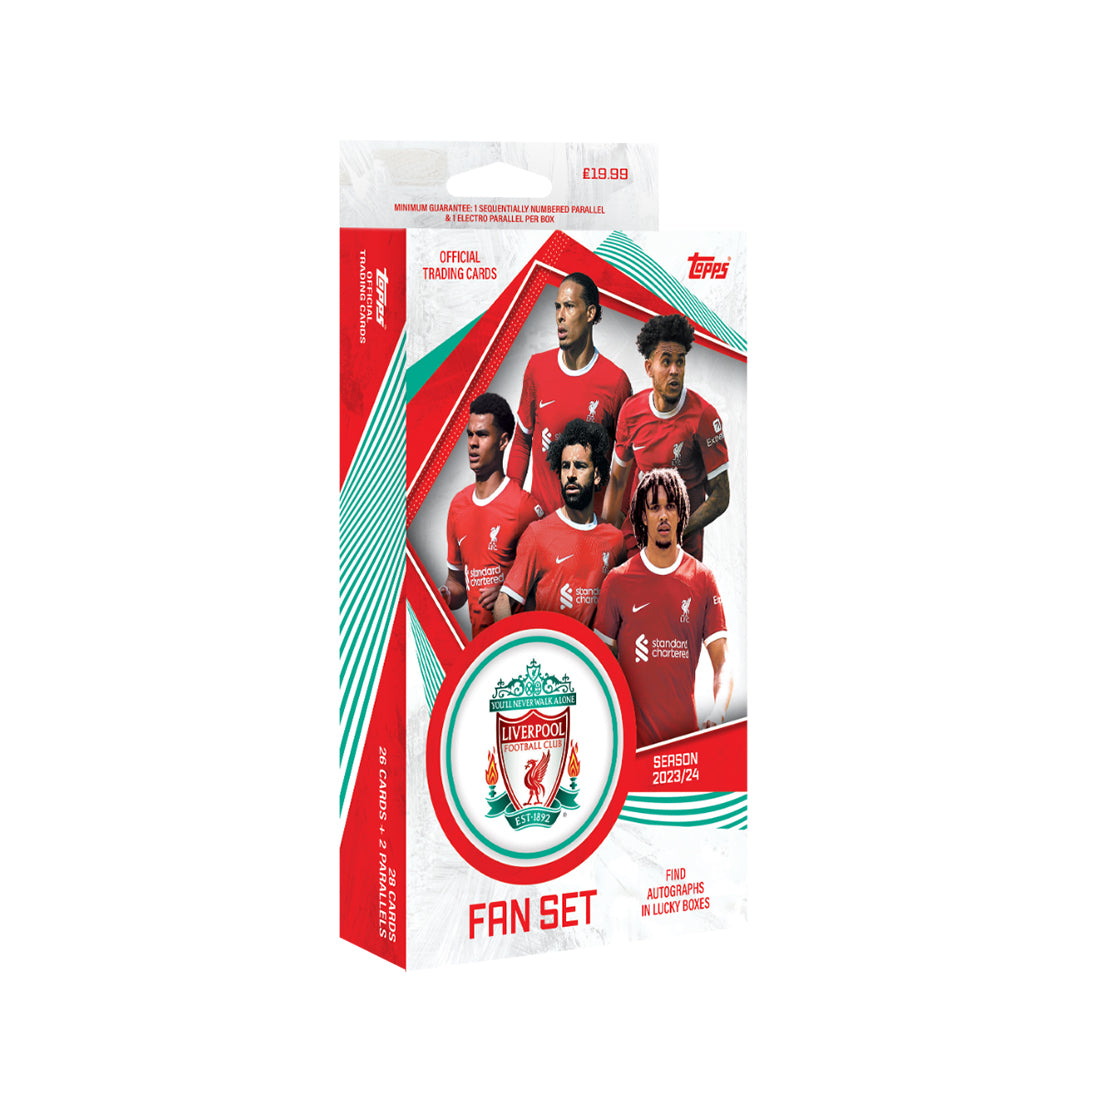 Buy 2021-22 Topps Champions League Sticker Box Online! – SoccerCards.ca